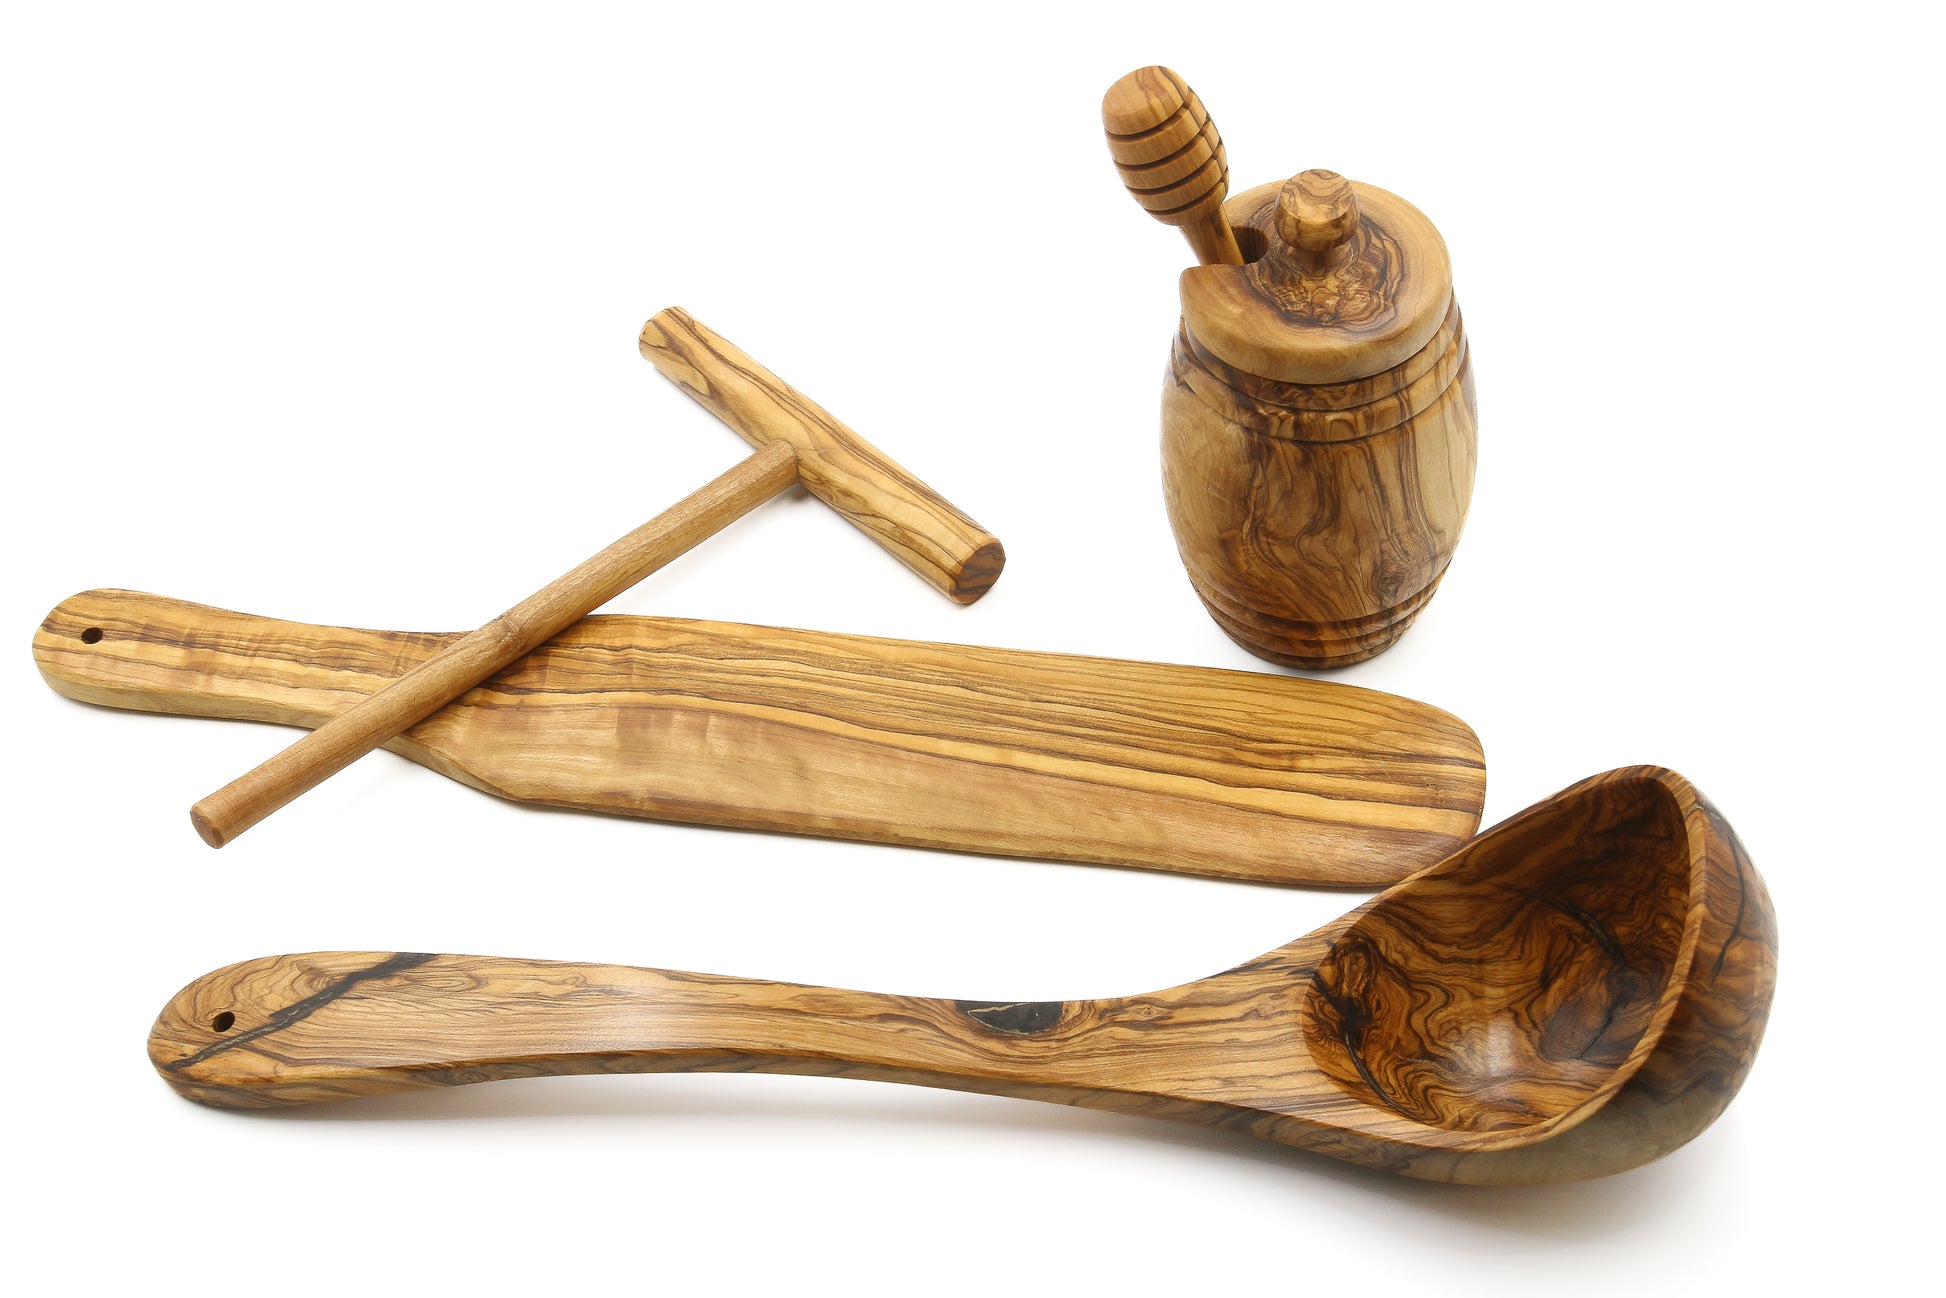 Handcrafted olive wood set designed for the masterful preparation of crepes and pancakes